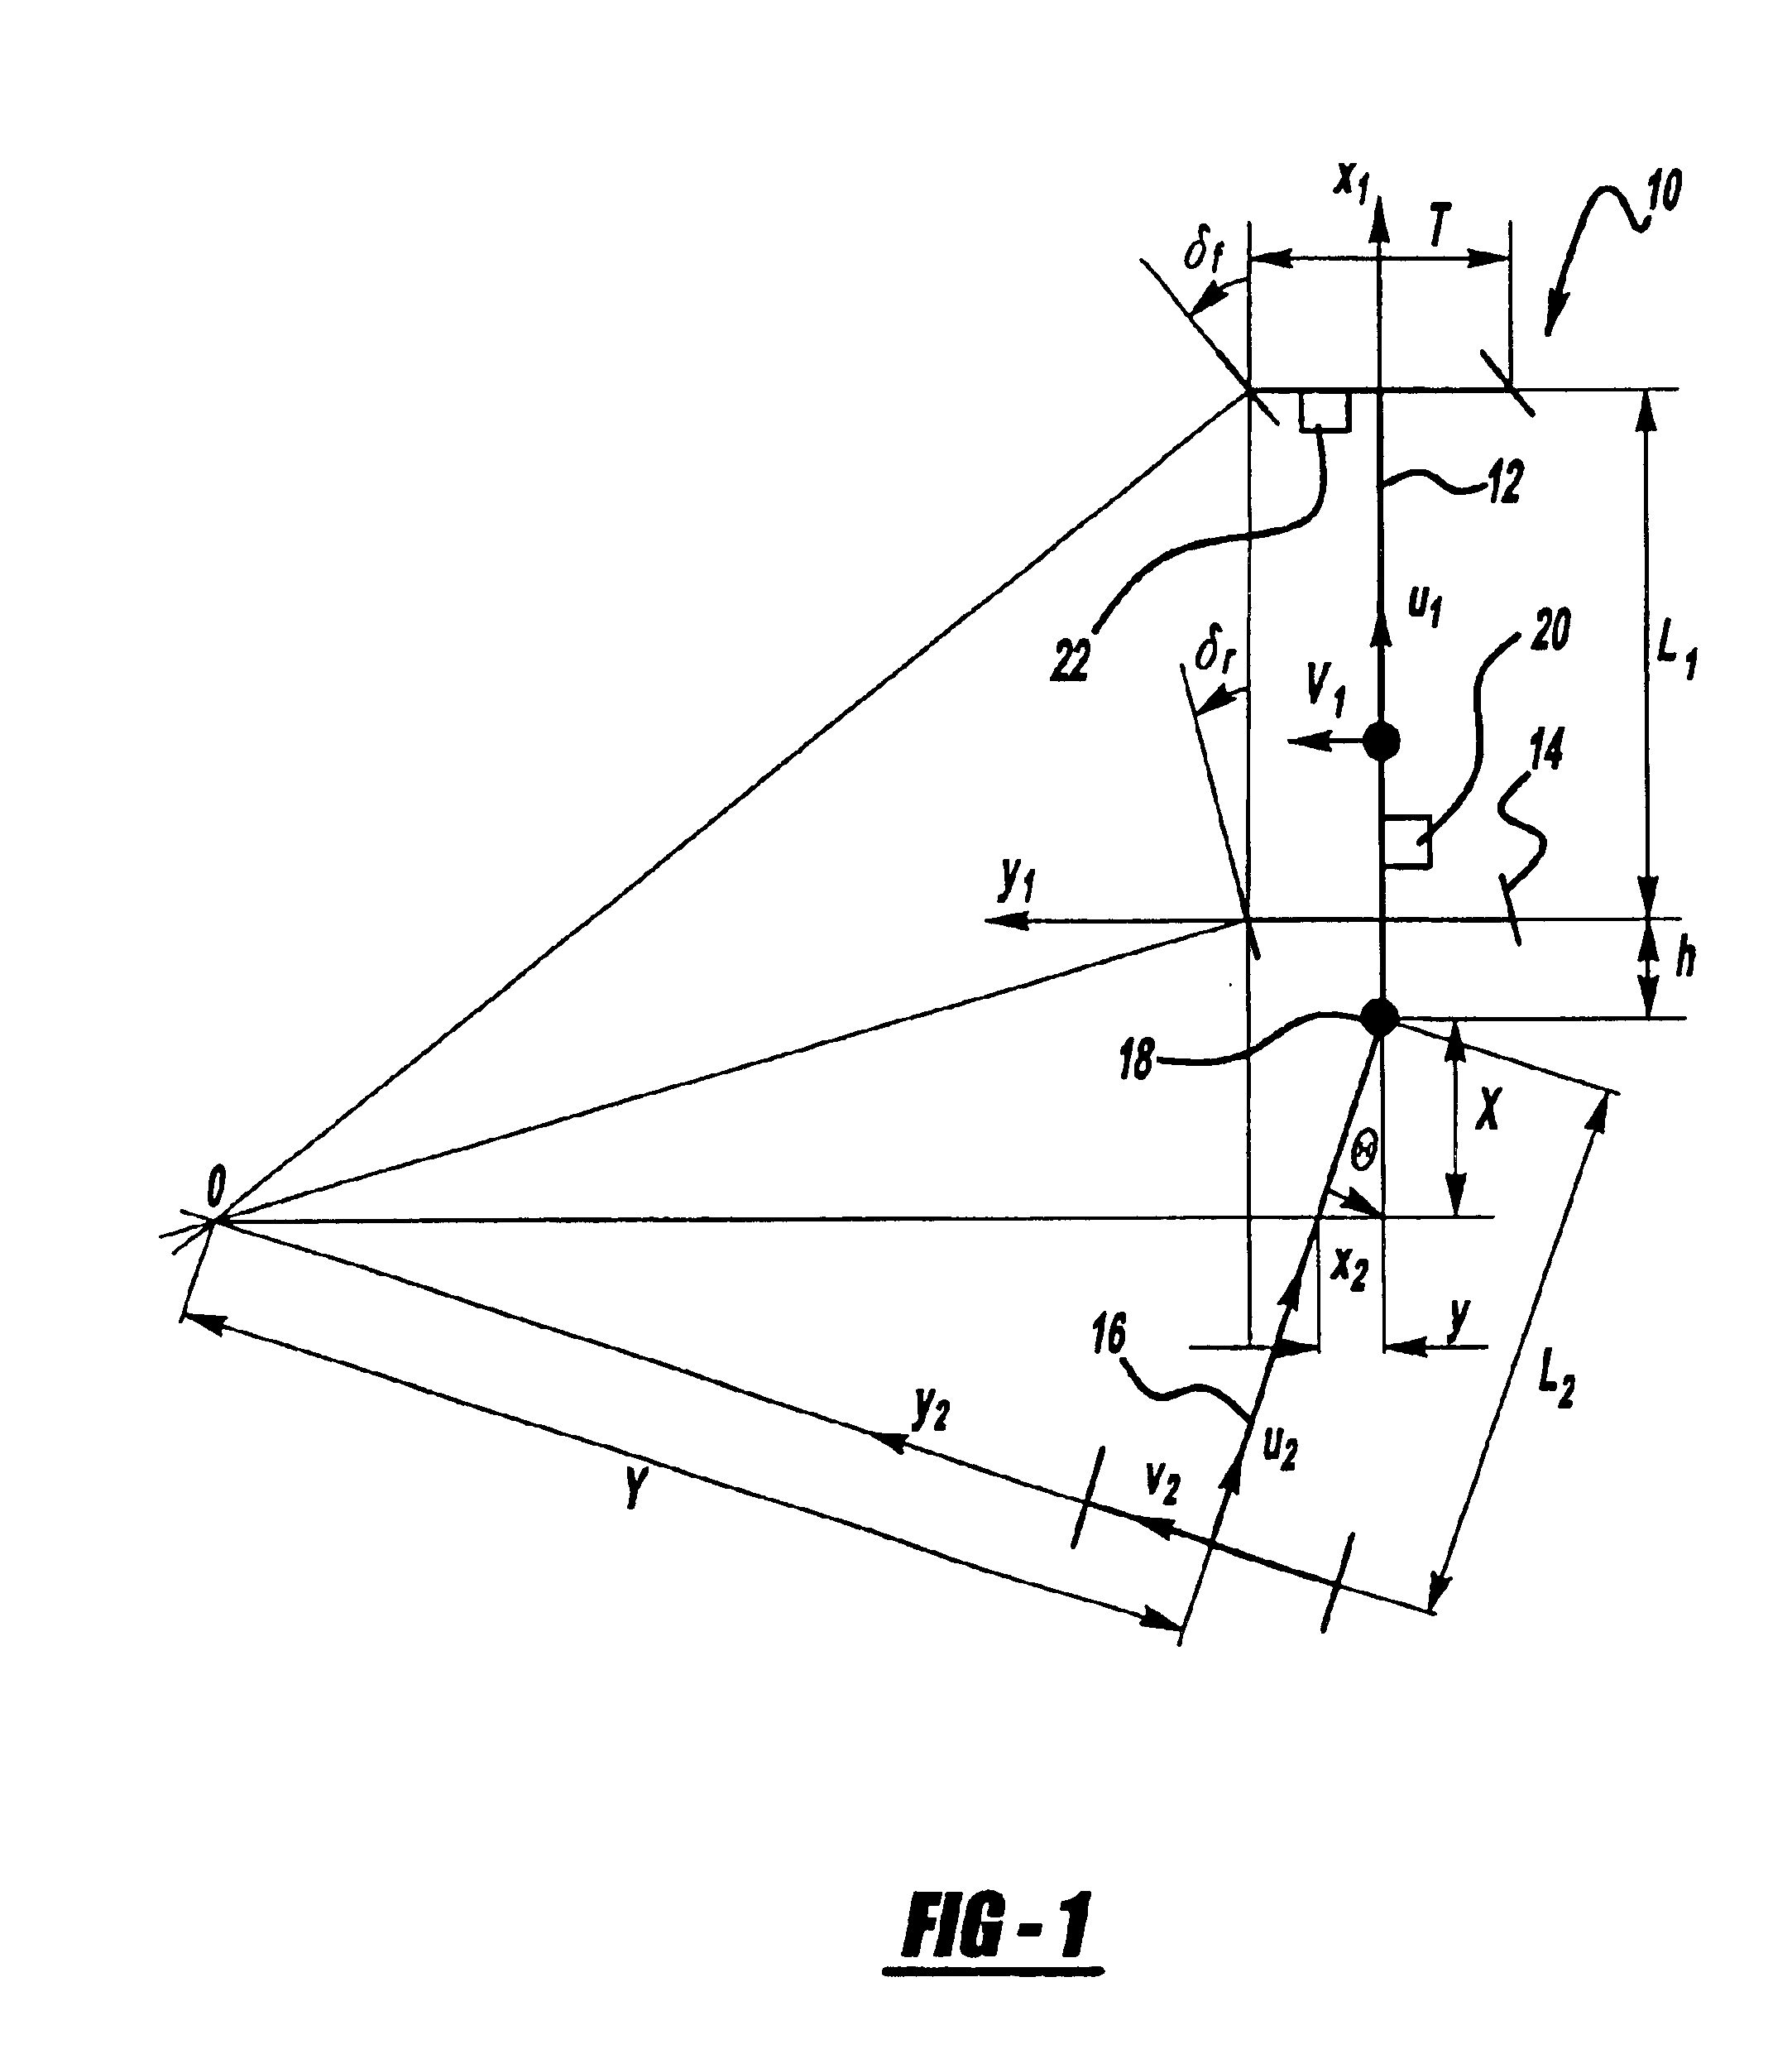 Anti-jackknife control for vehicle-trailer backing up using rear-wheel steer control